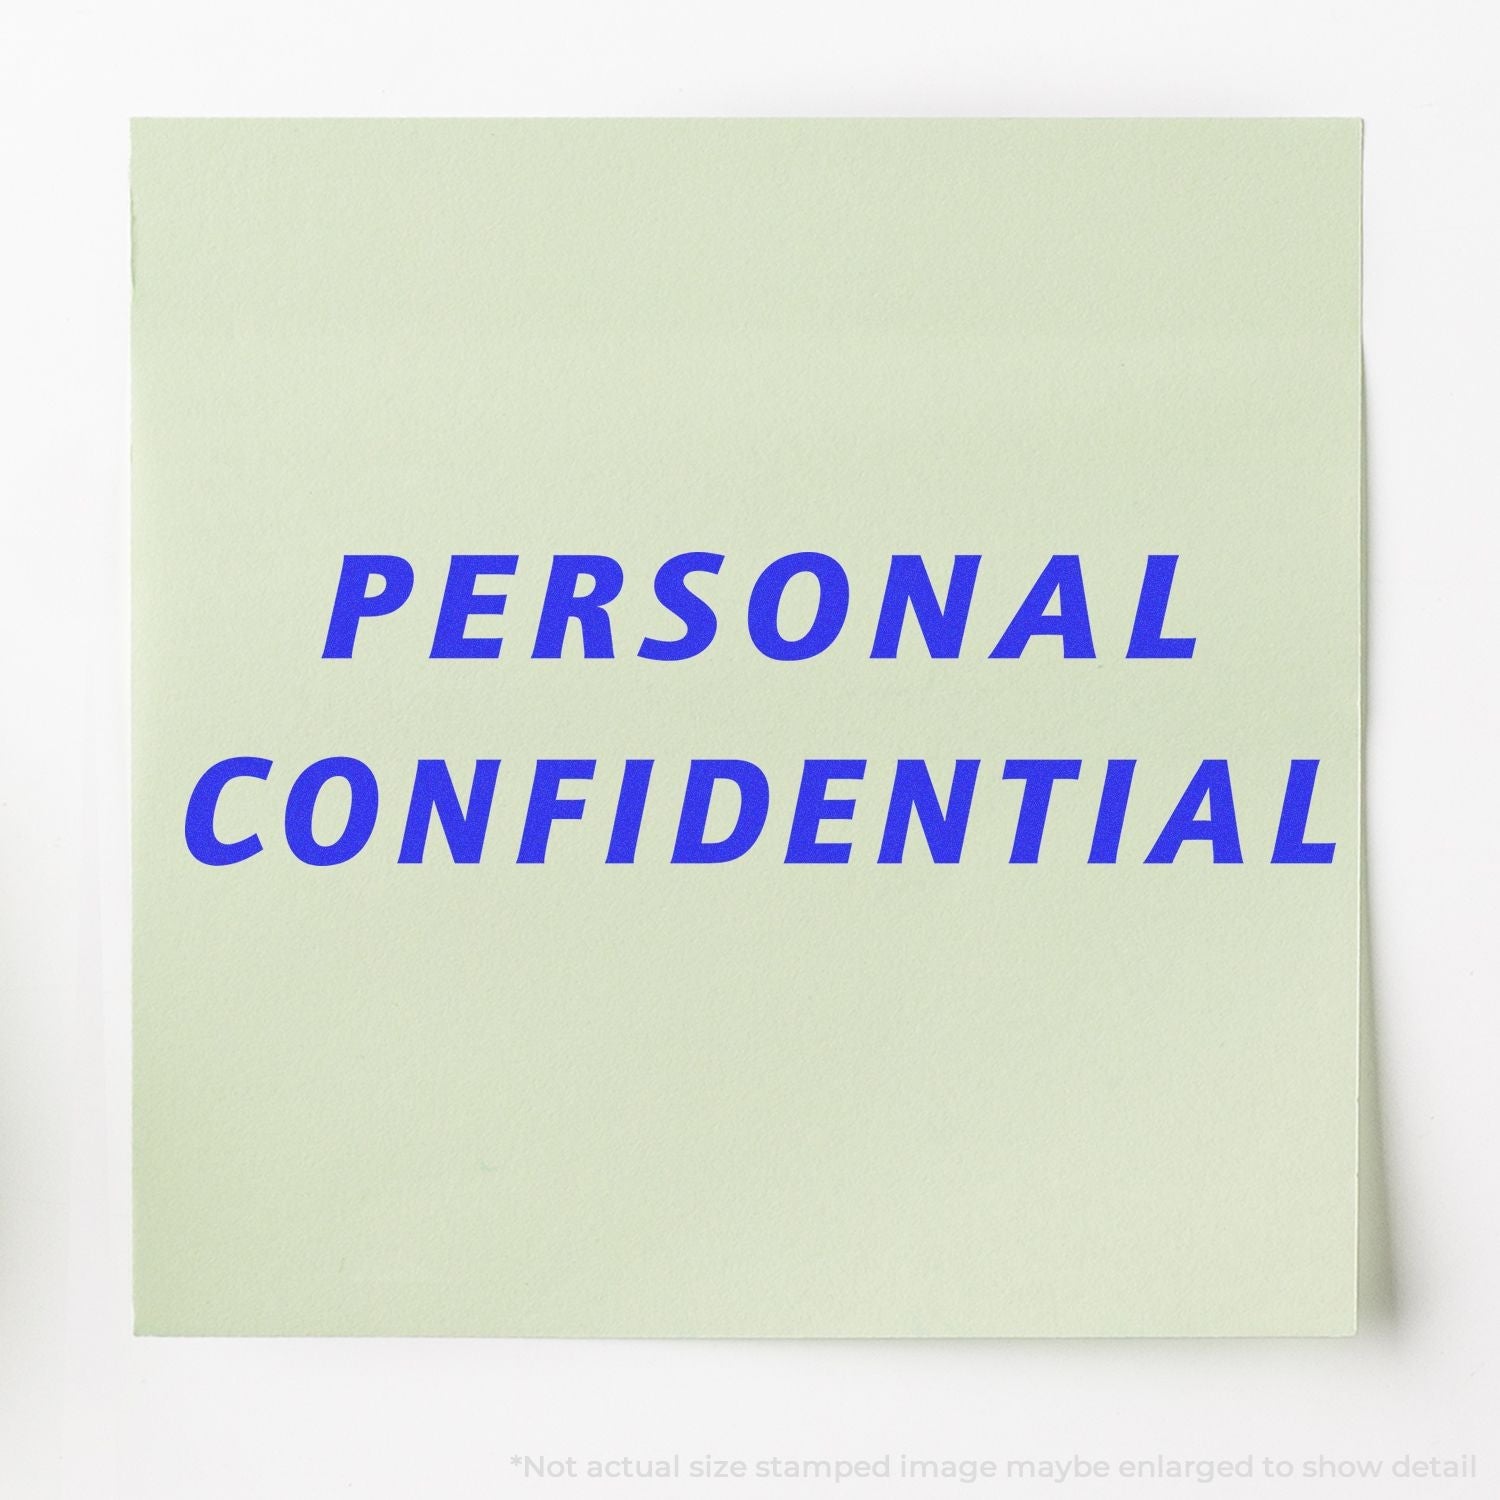 A self-inking stamp with a stamped image showing how the text "PERSONAL CONFIDENTIAL" in italic font is displayed after stamping.